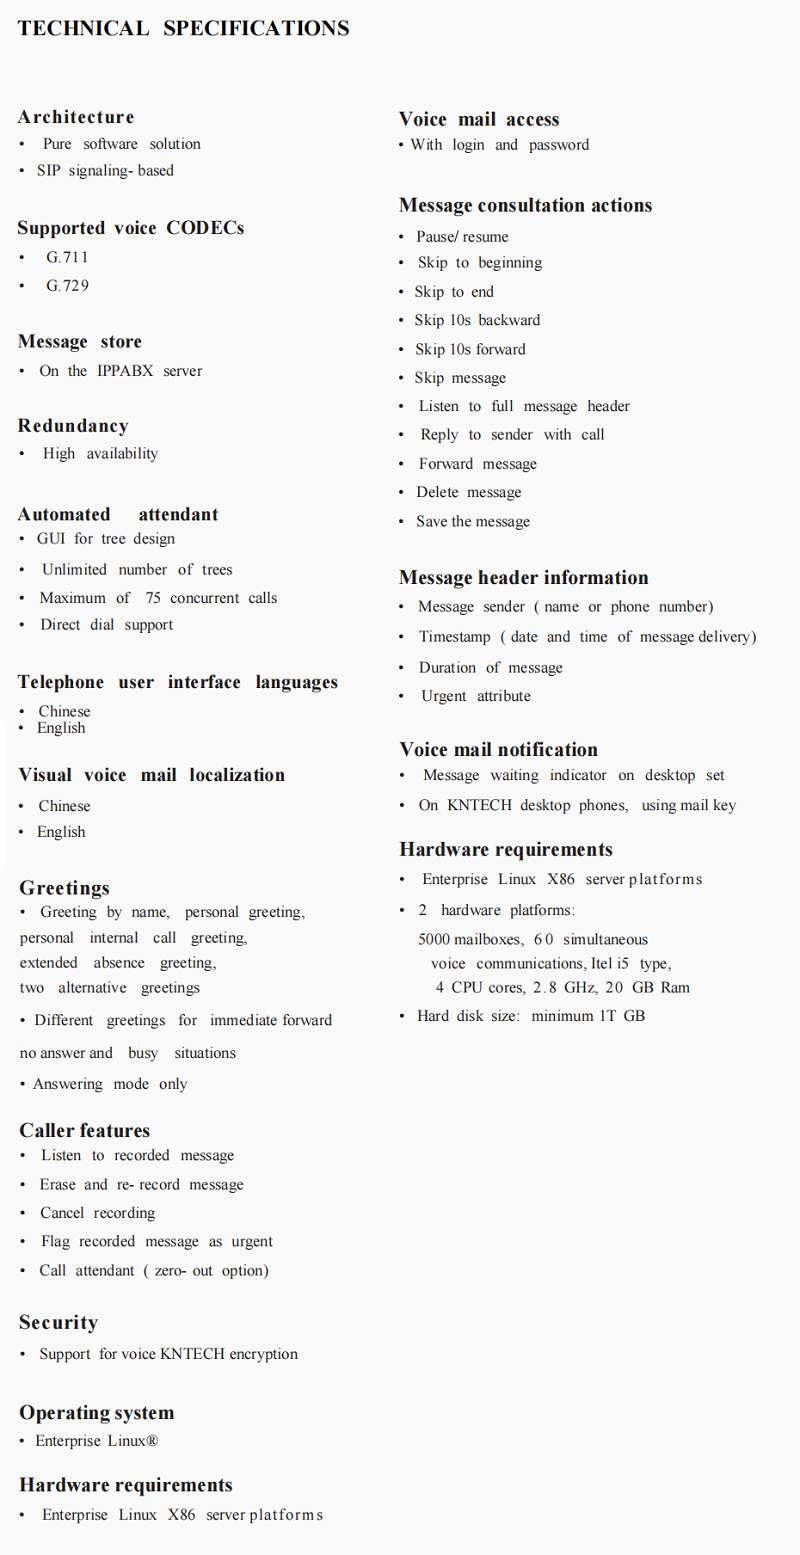 voice mail specification